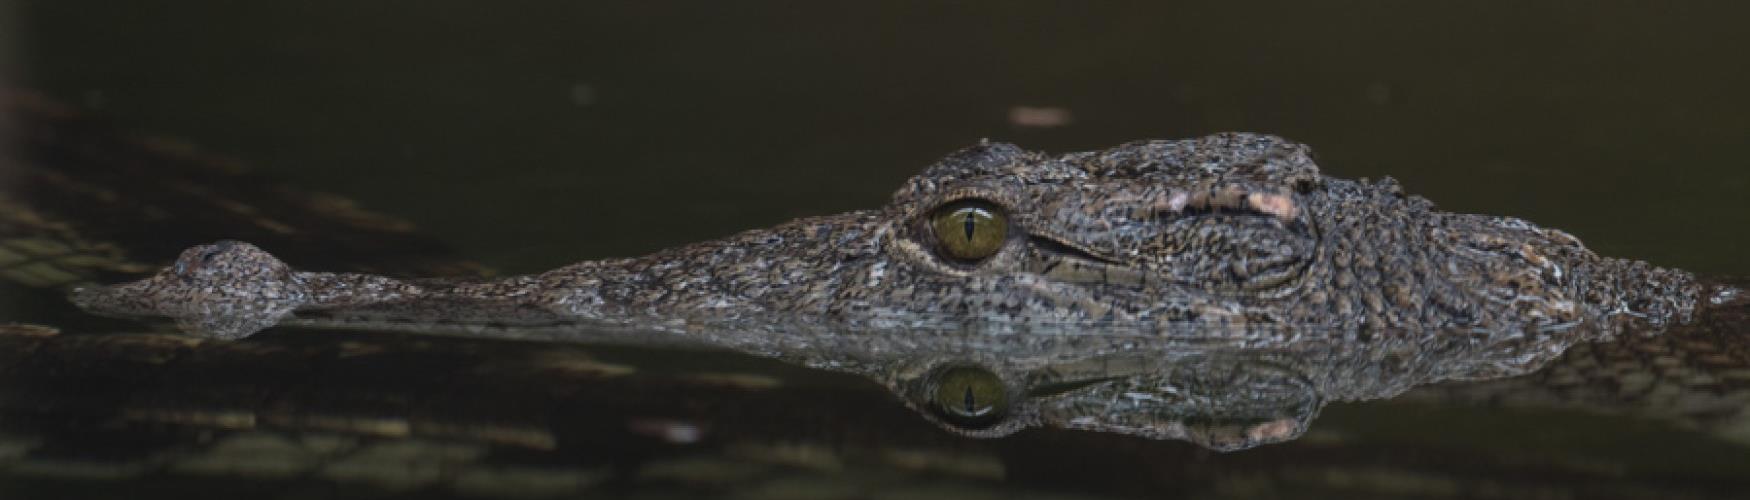 A crocodile lazing in water at Crocodiles of the World